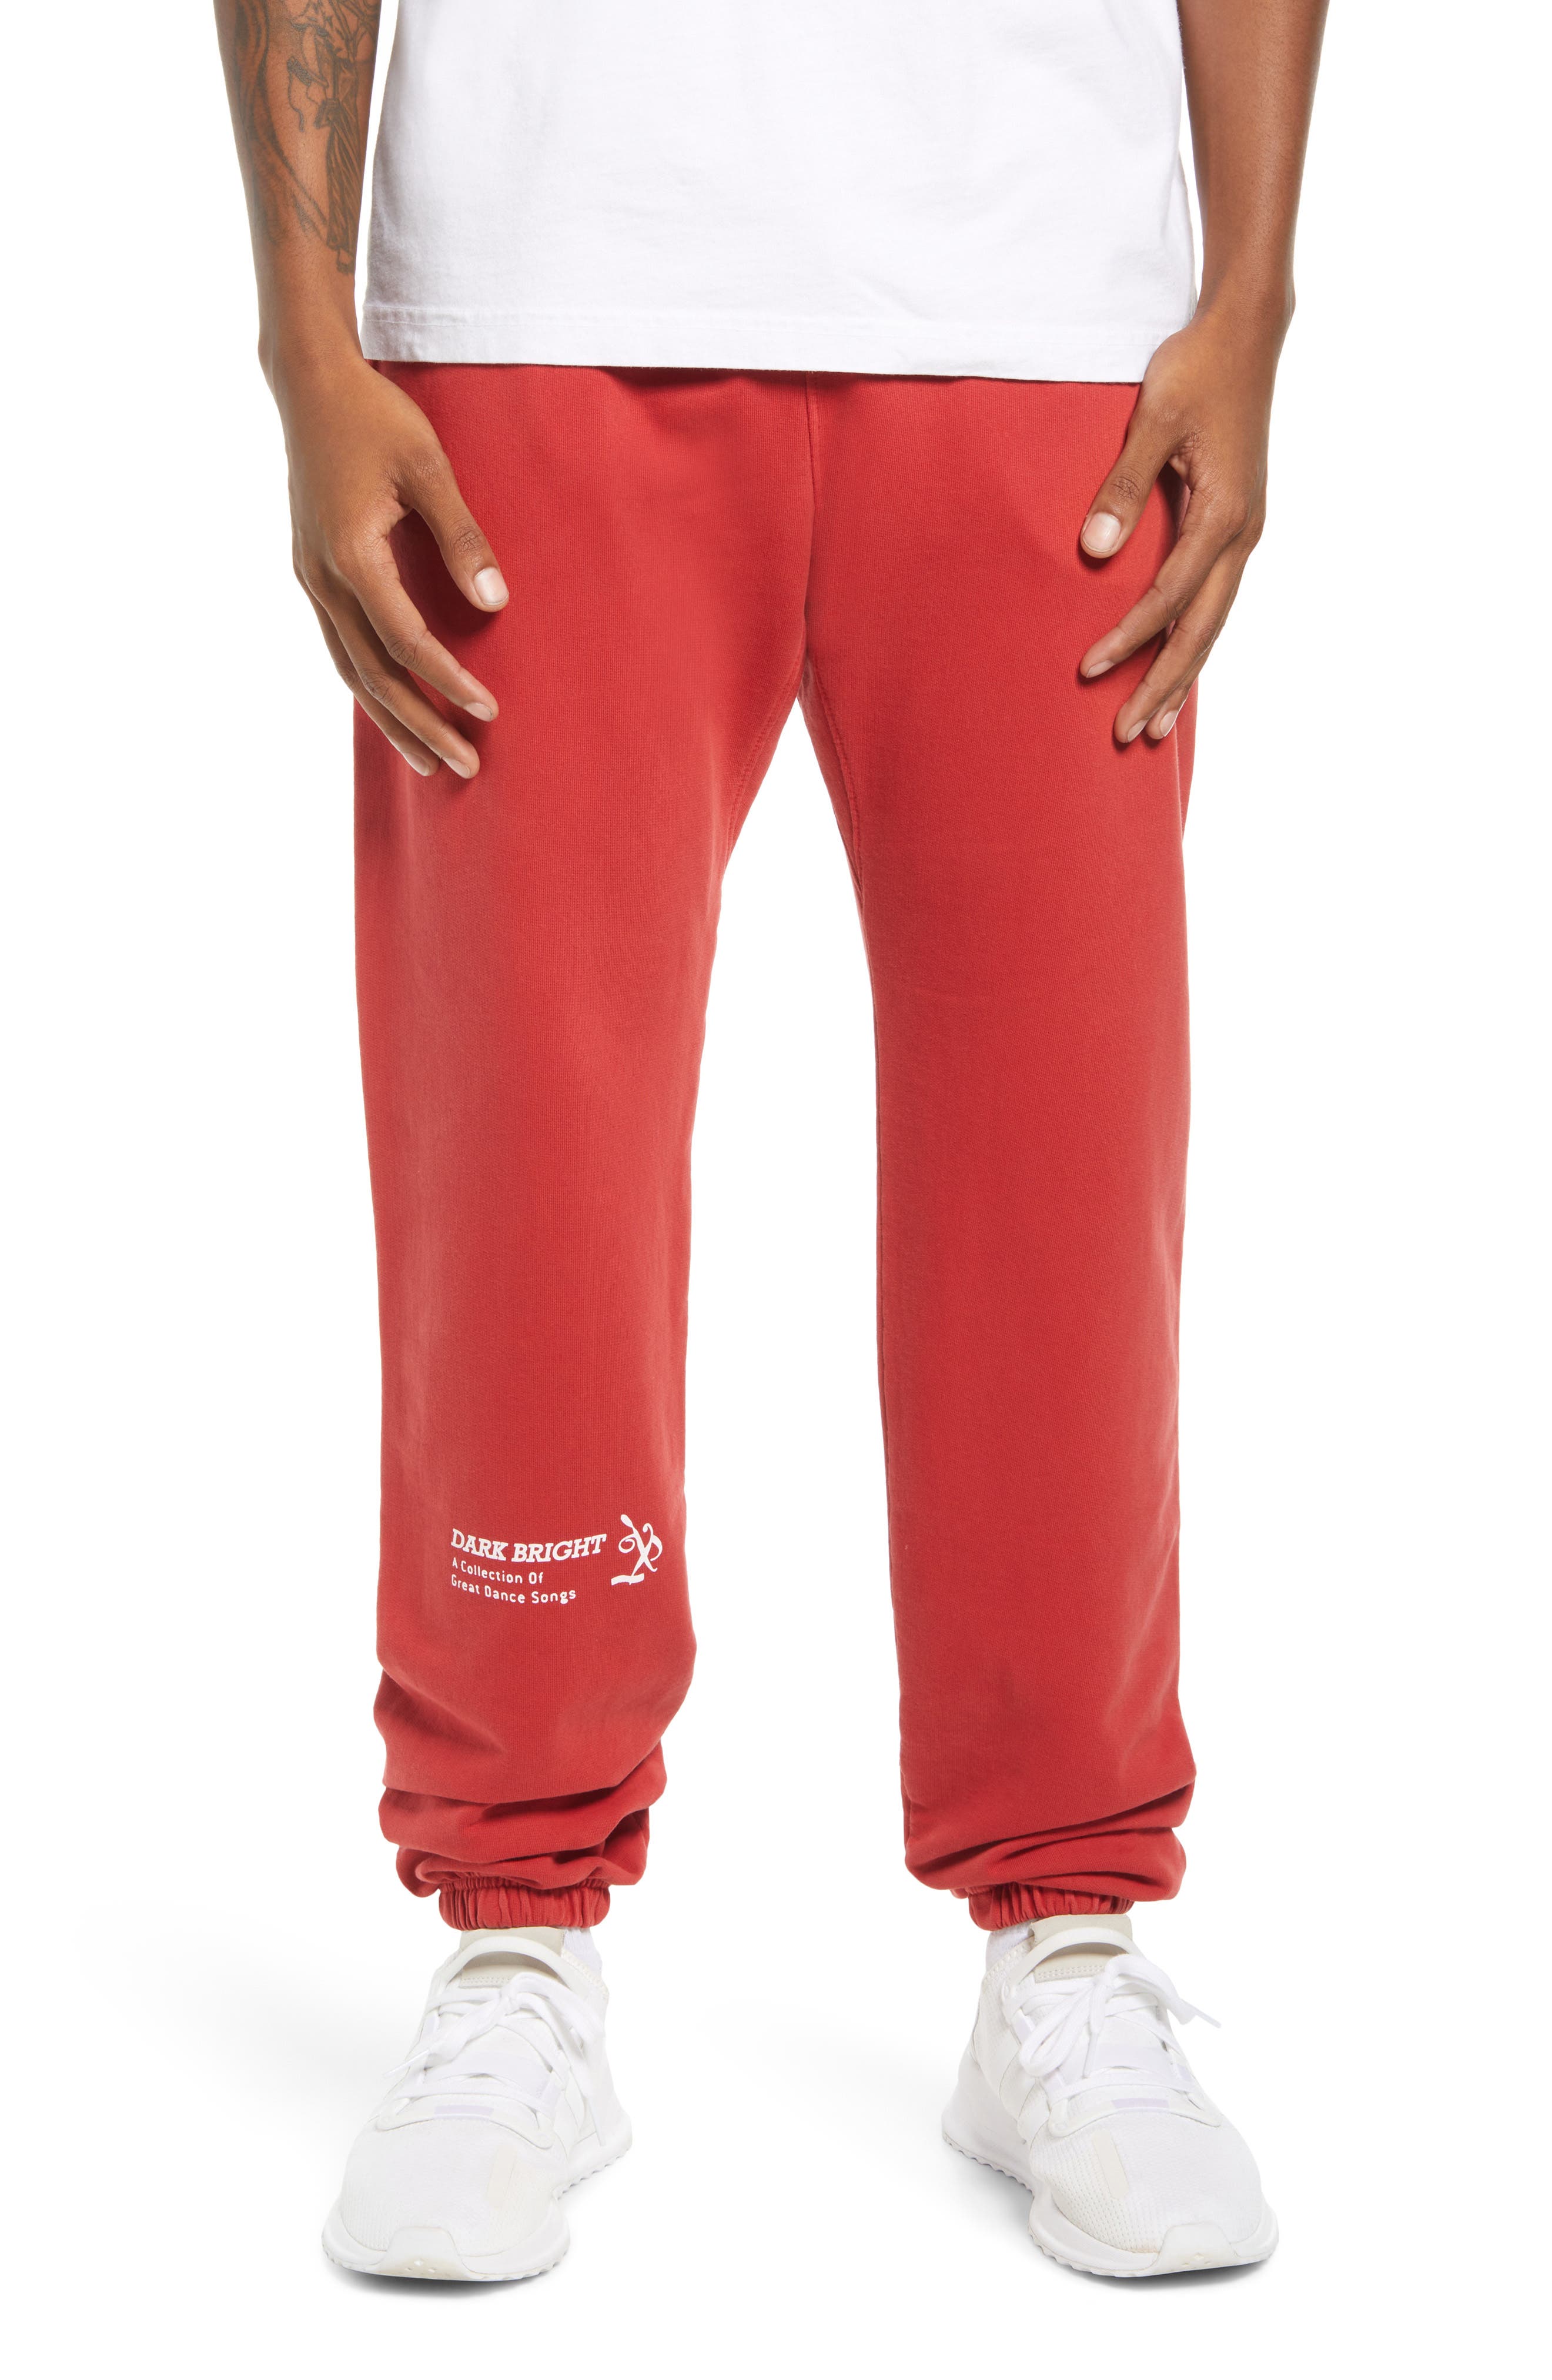 DARKBRIGHT Dance Songs Graphic Sweatpants in Red at Nordstrom